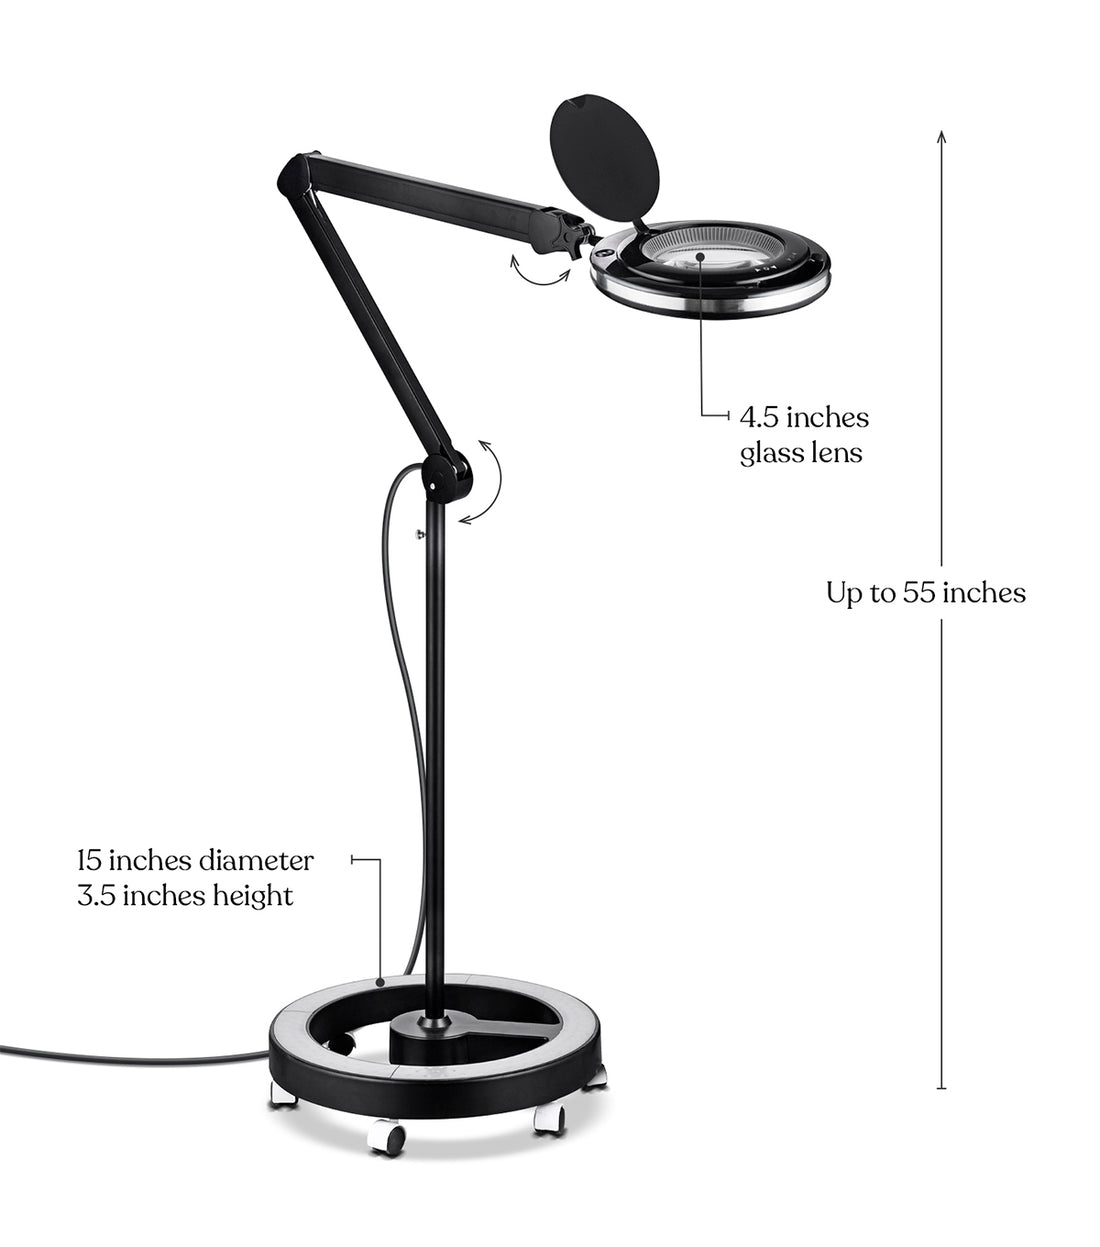 Brightech LightView Pro XL LED Magnifying Desk Table Clamp Lamp Bright